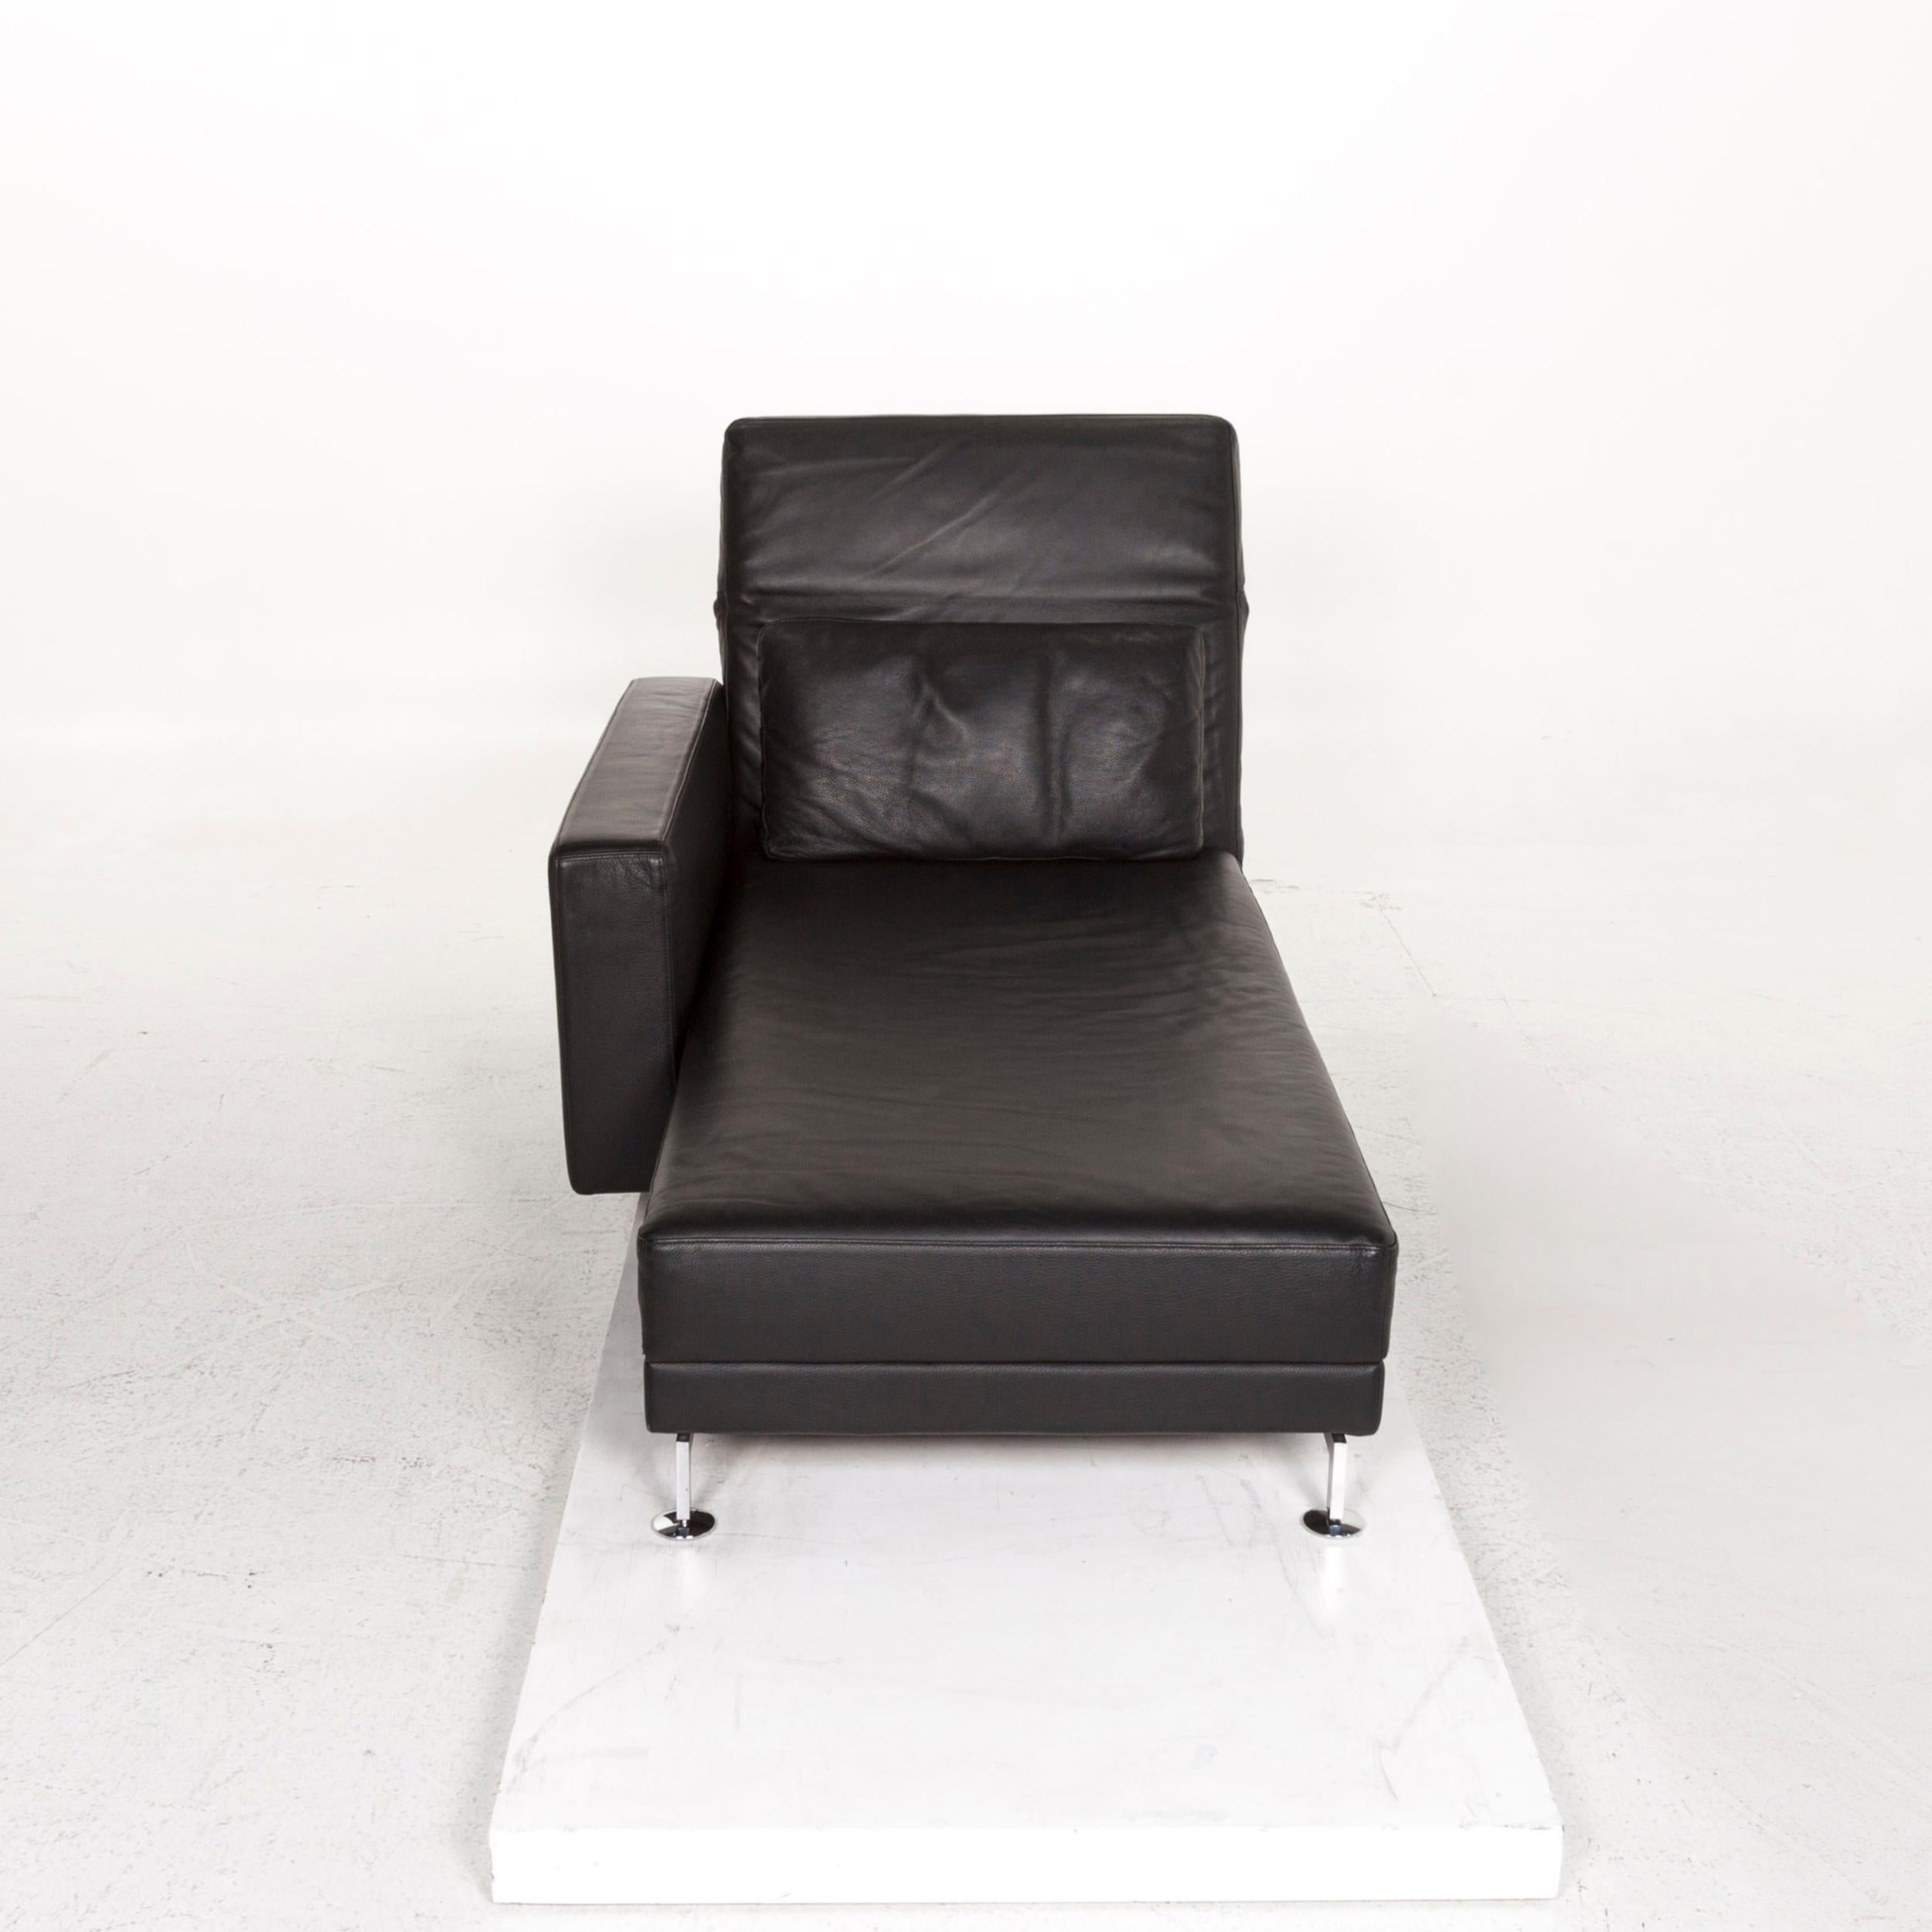 Brühl & Sippold Moule Leather Lounger Black Function Relax Function For Sale 3